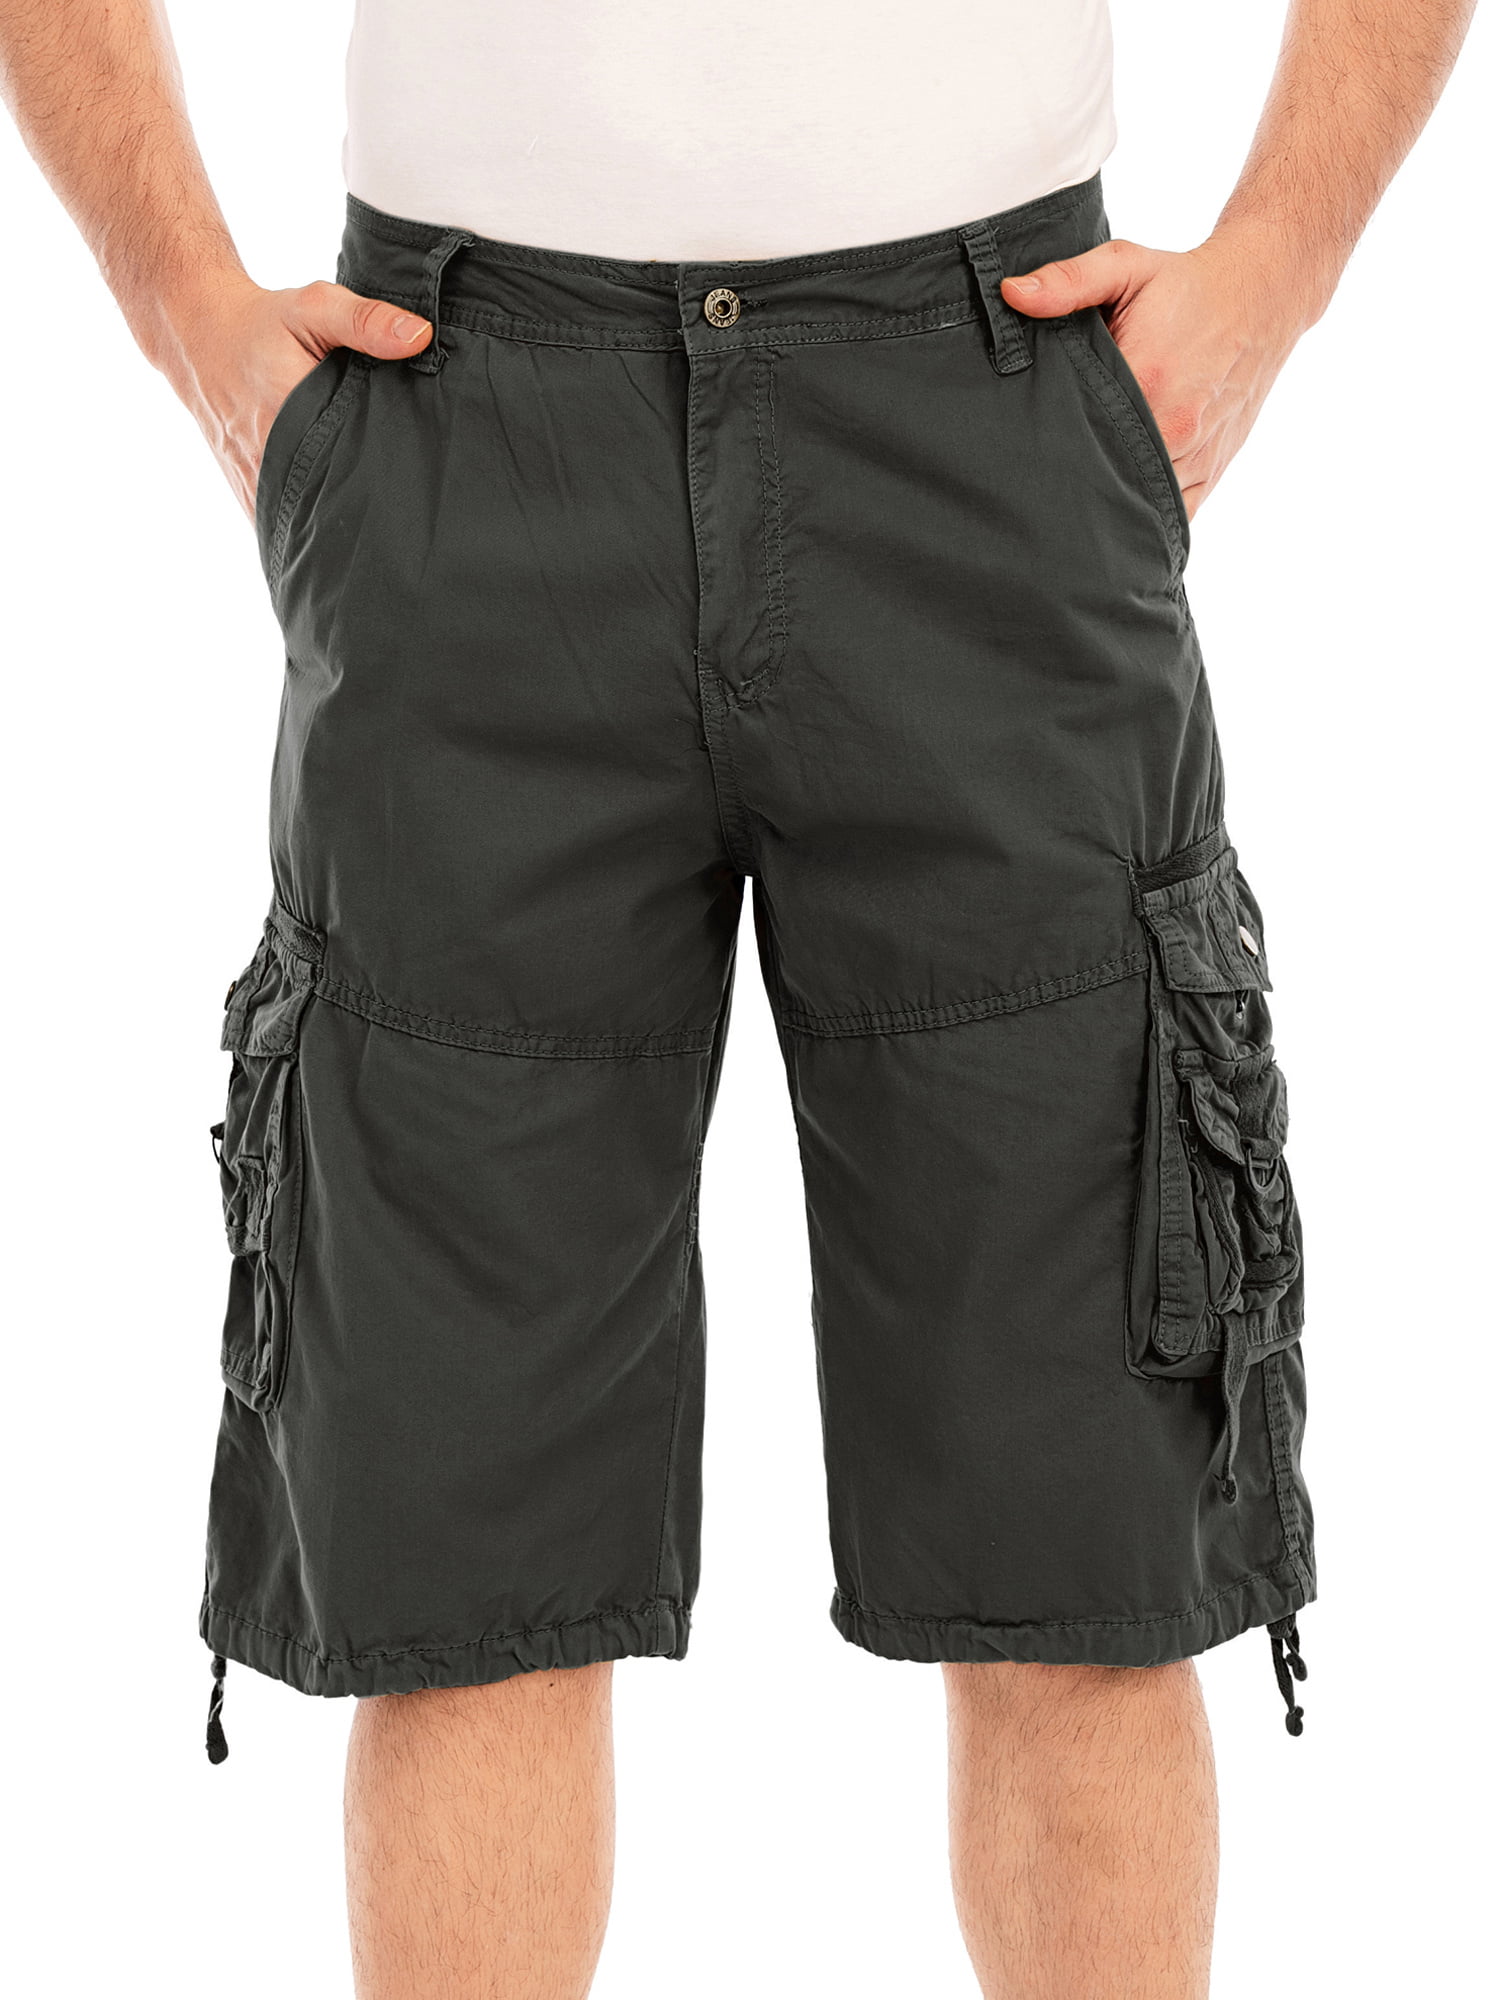 Men's 100%Cotton Cargo Shorts Military Pockets for Outdoor Fishing